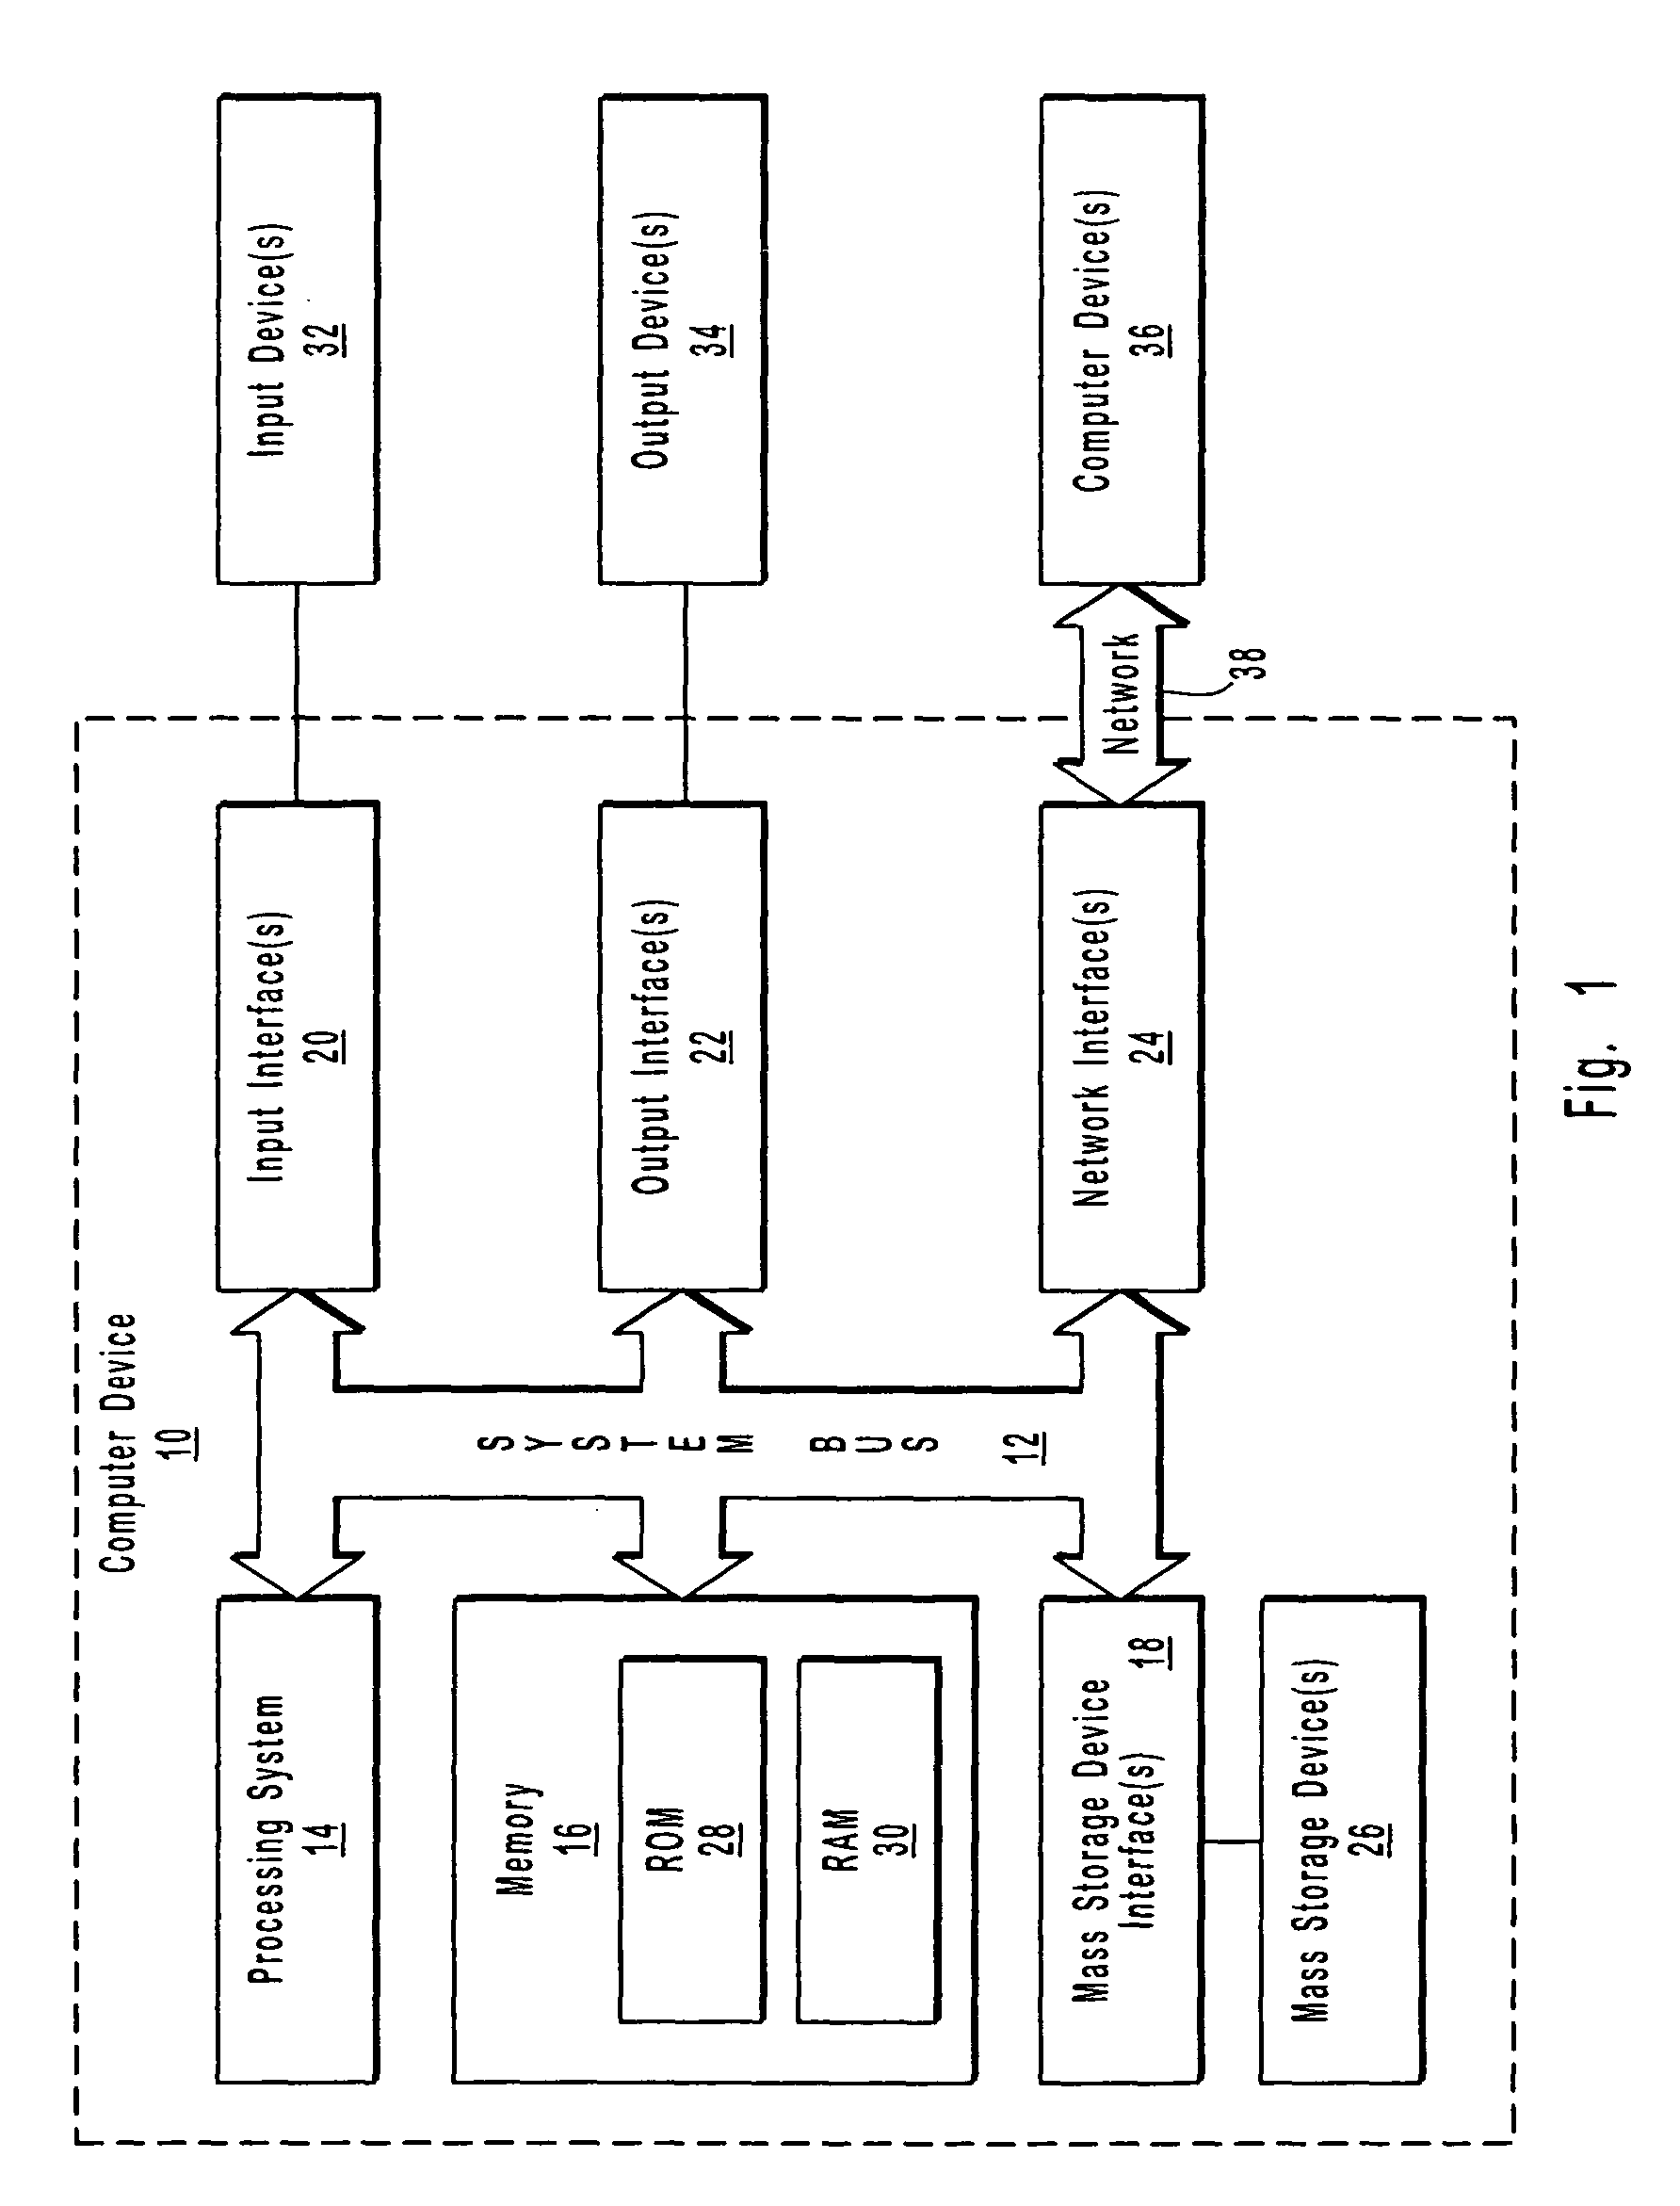 Systems and methods for providing imaging job control